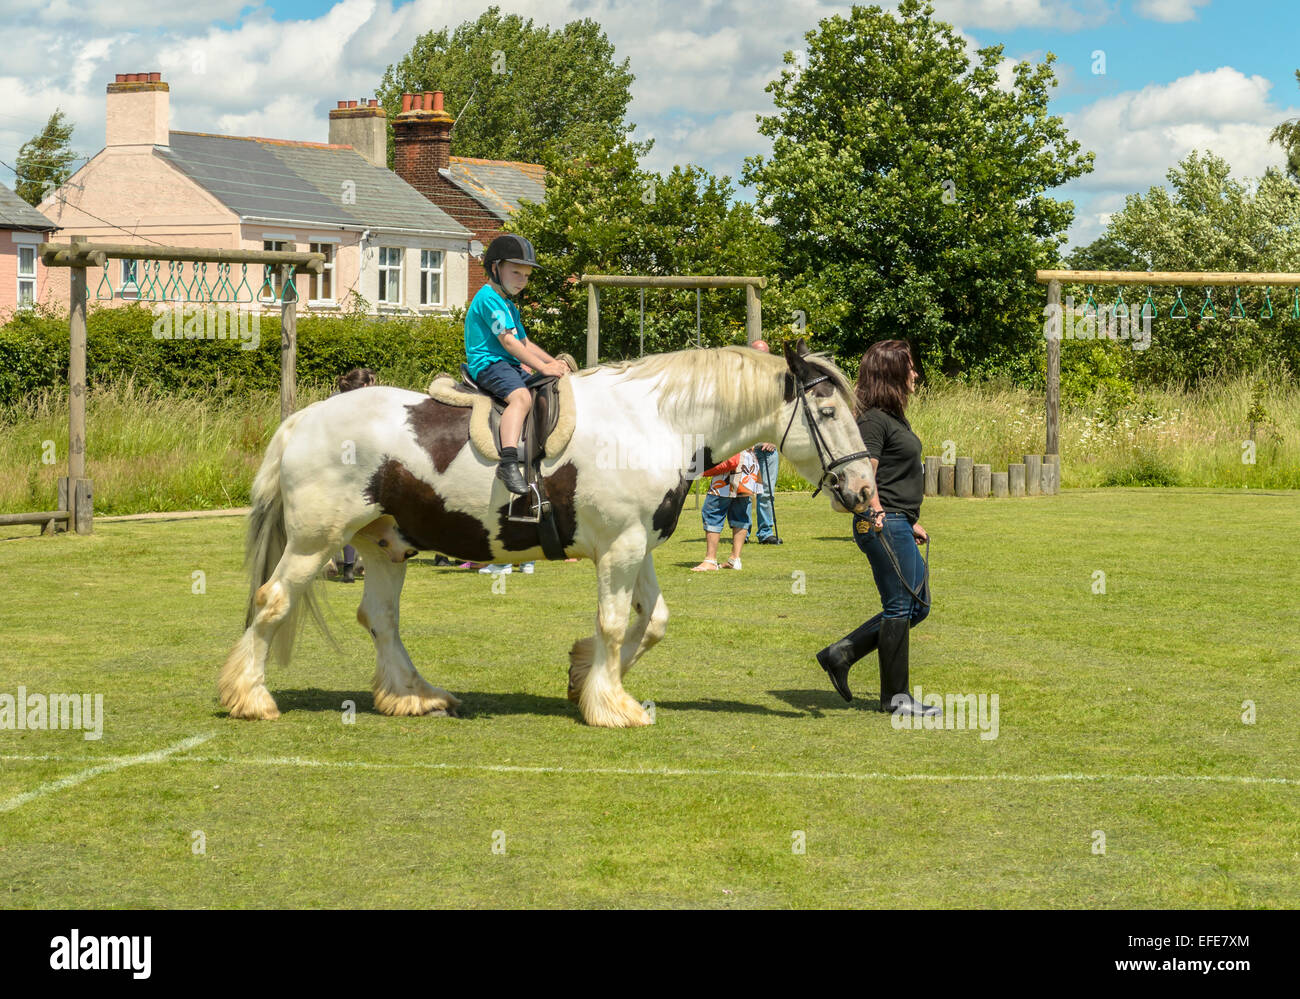 young girl sitting on a horse Essex England UK Stock Photo